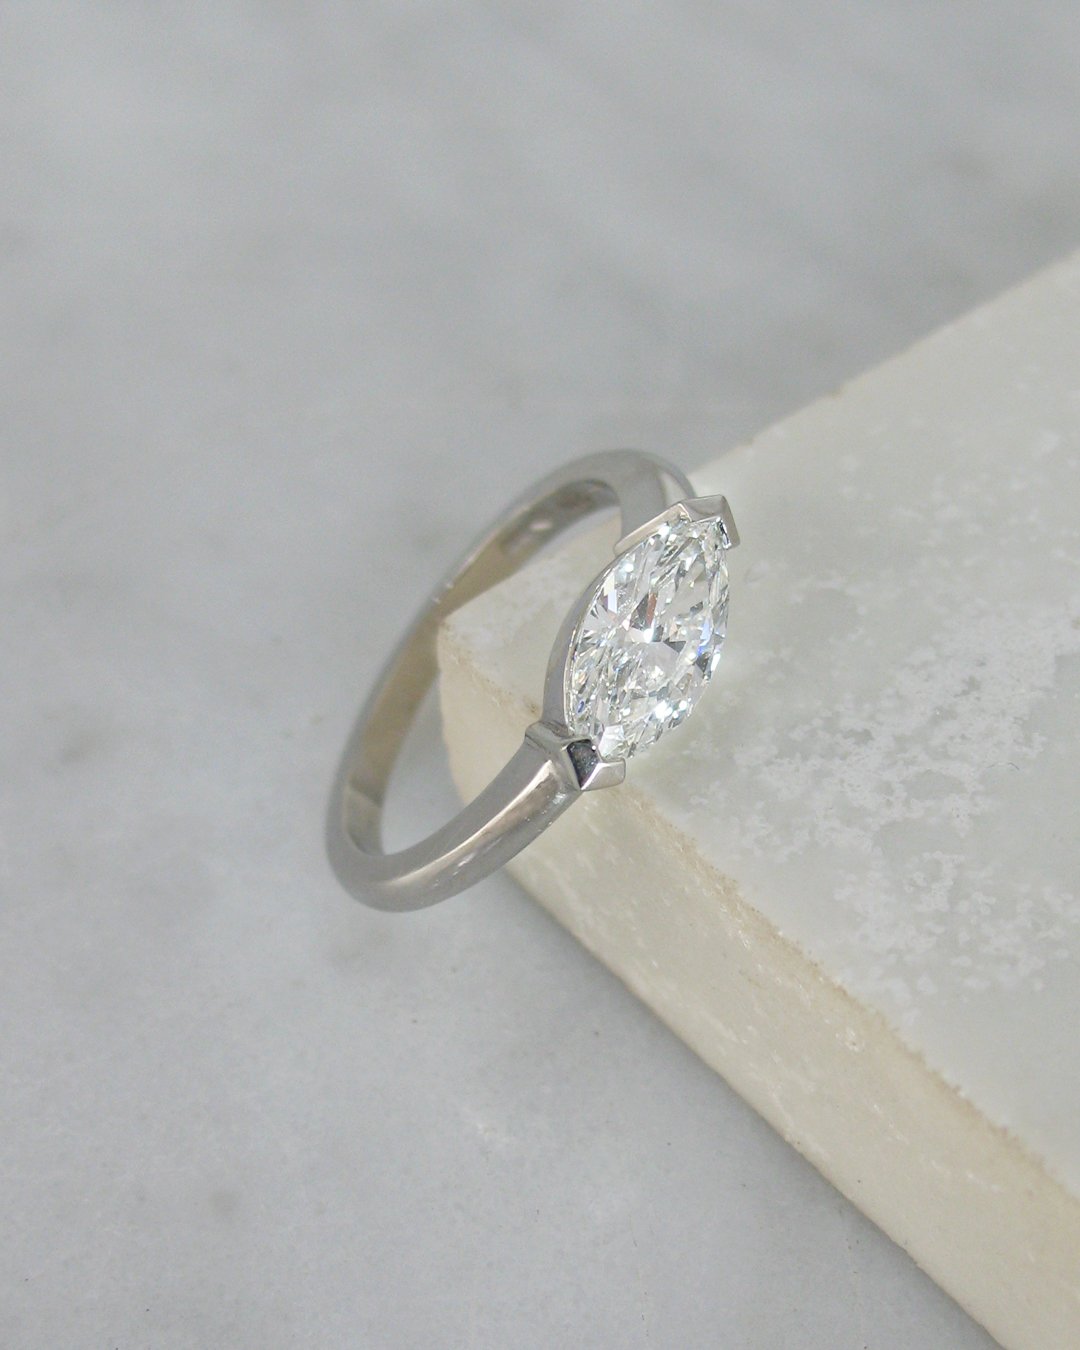 A magnificent bespoke marquise diamond engagement ring